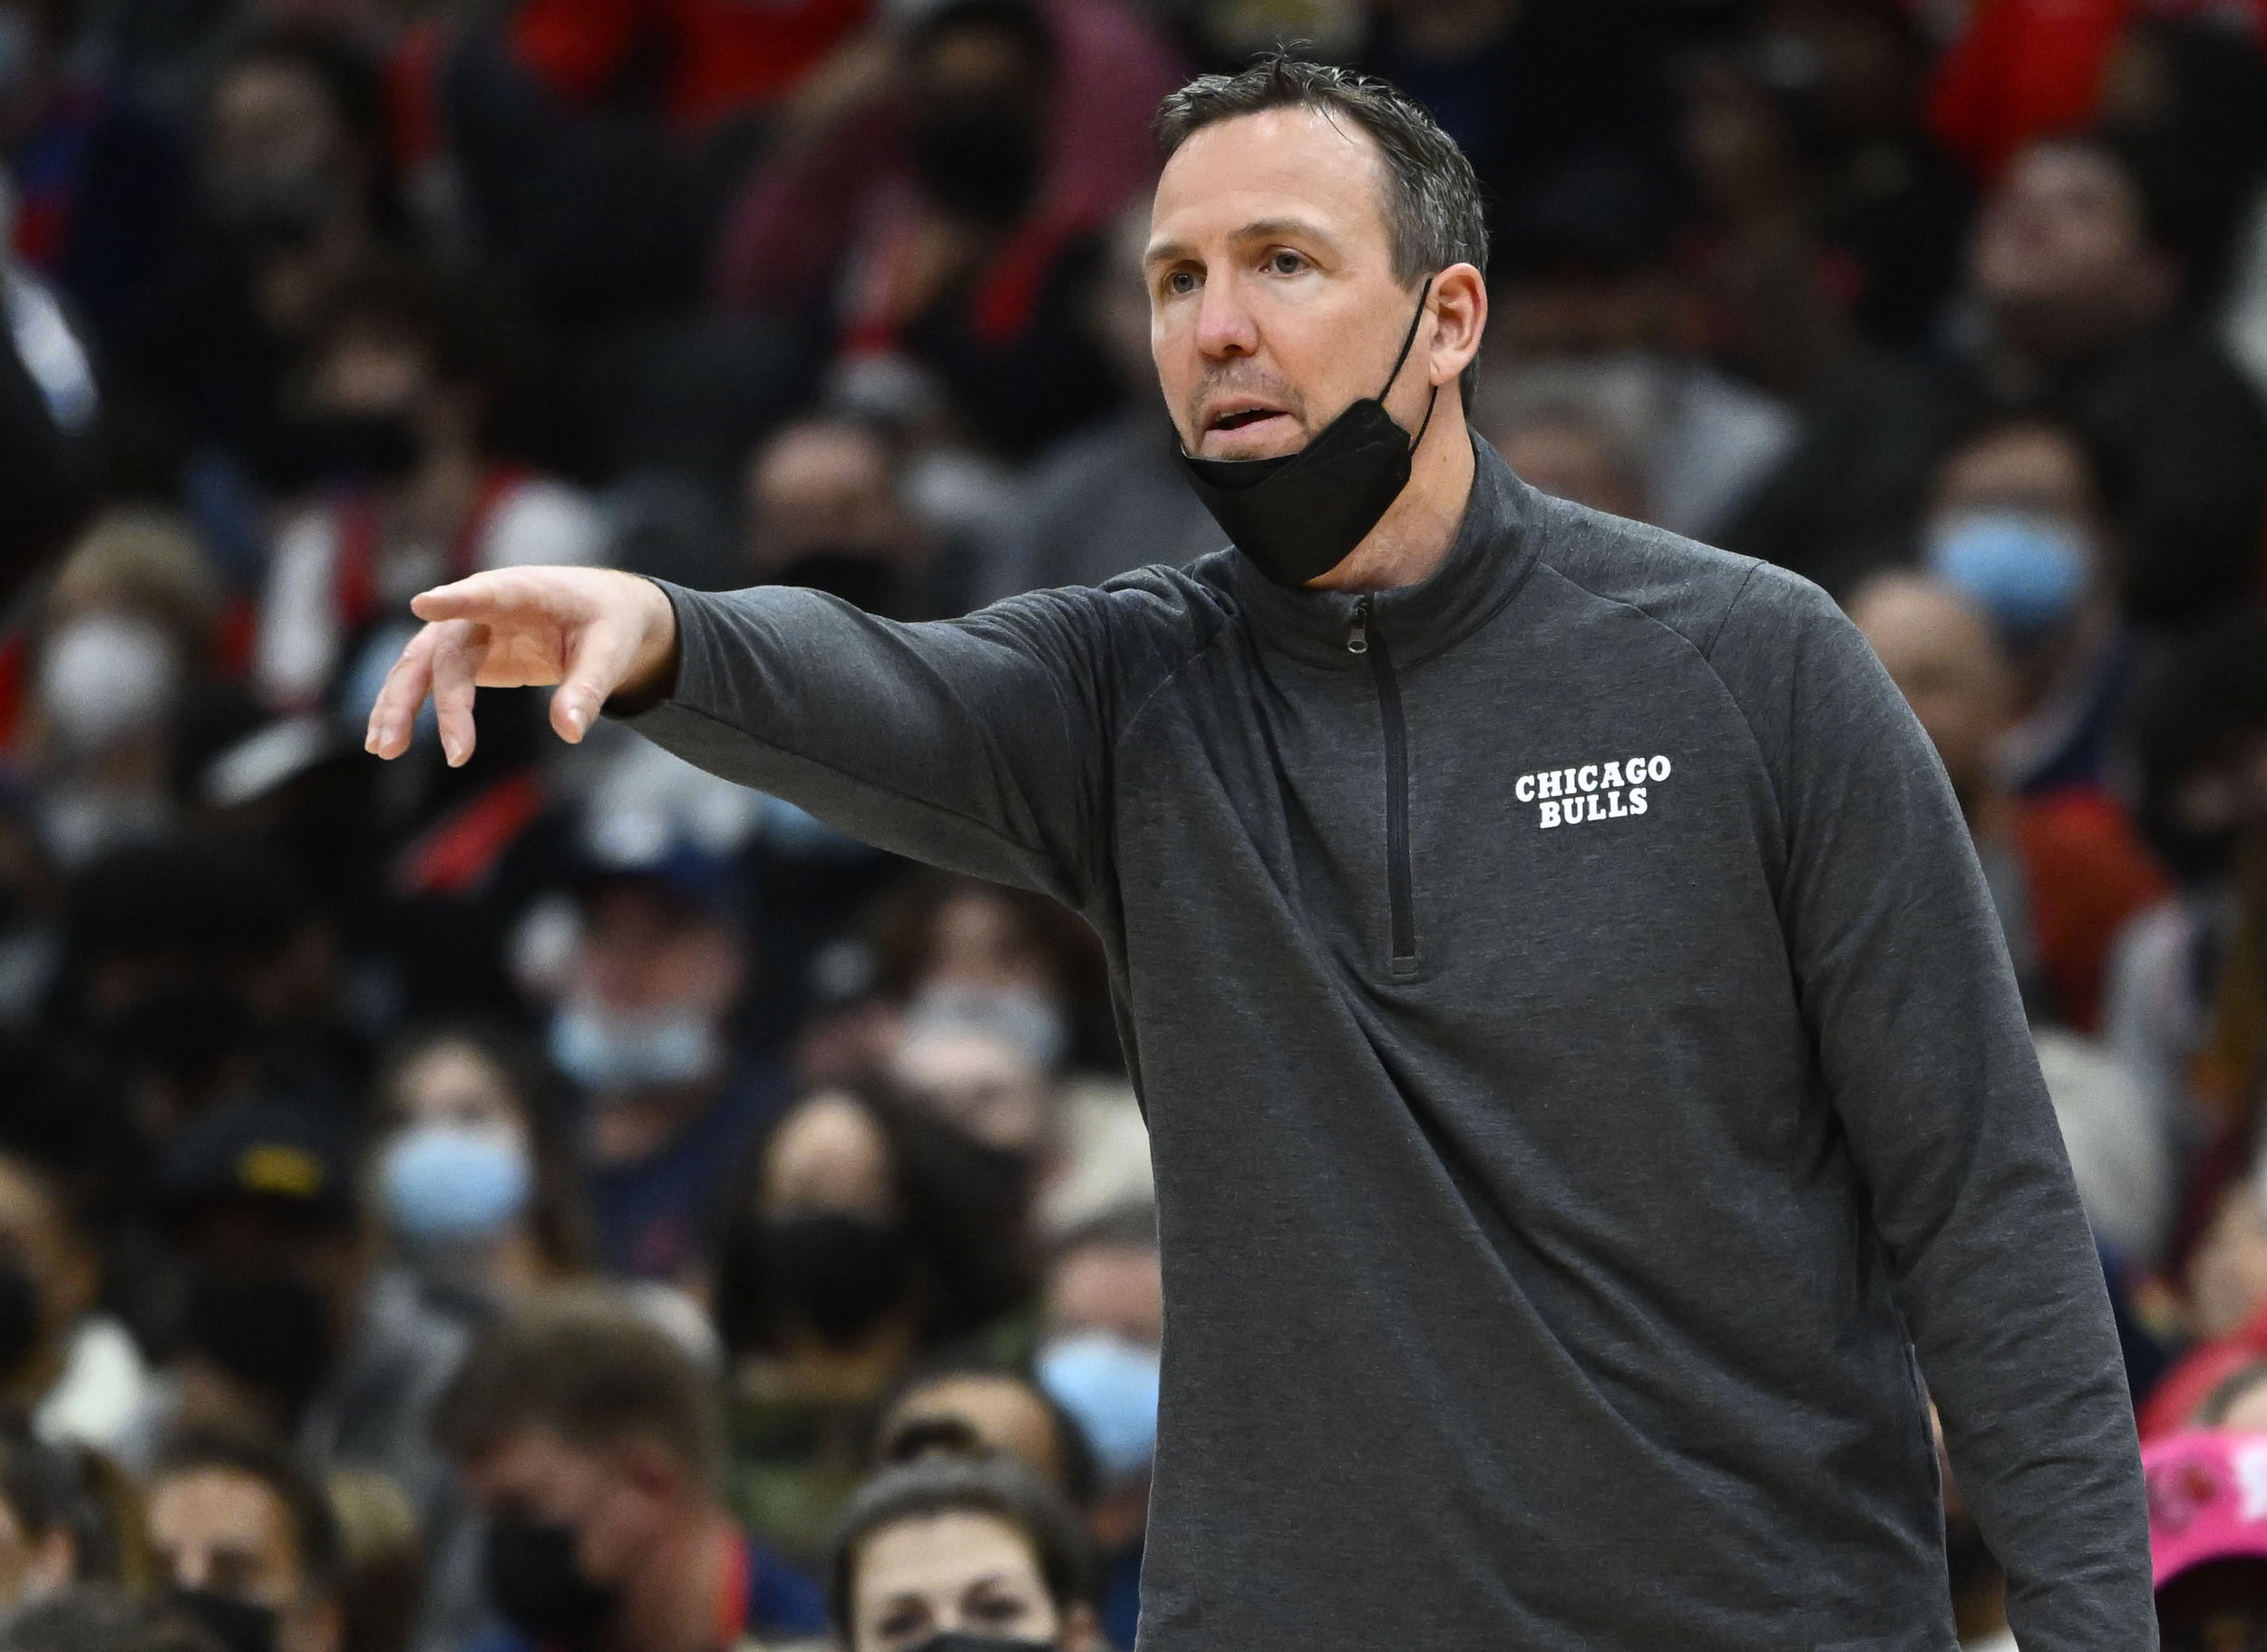 bulls reportedly make changes to coaching staff after disappointing season